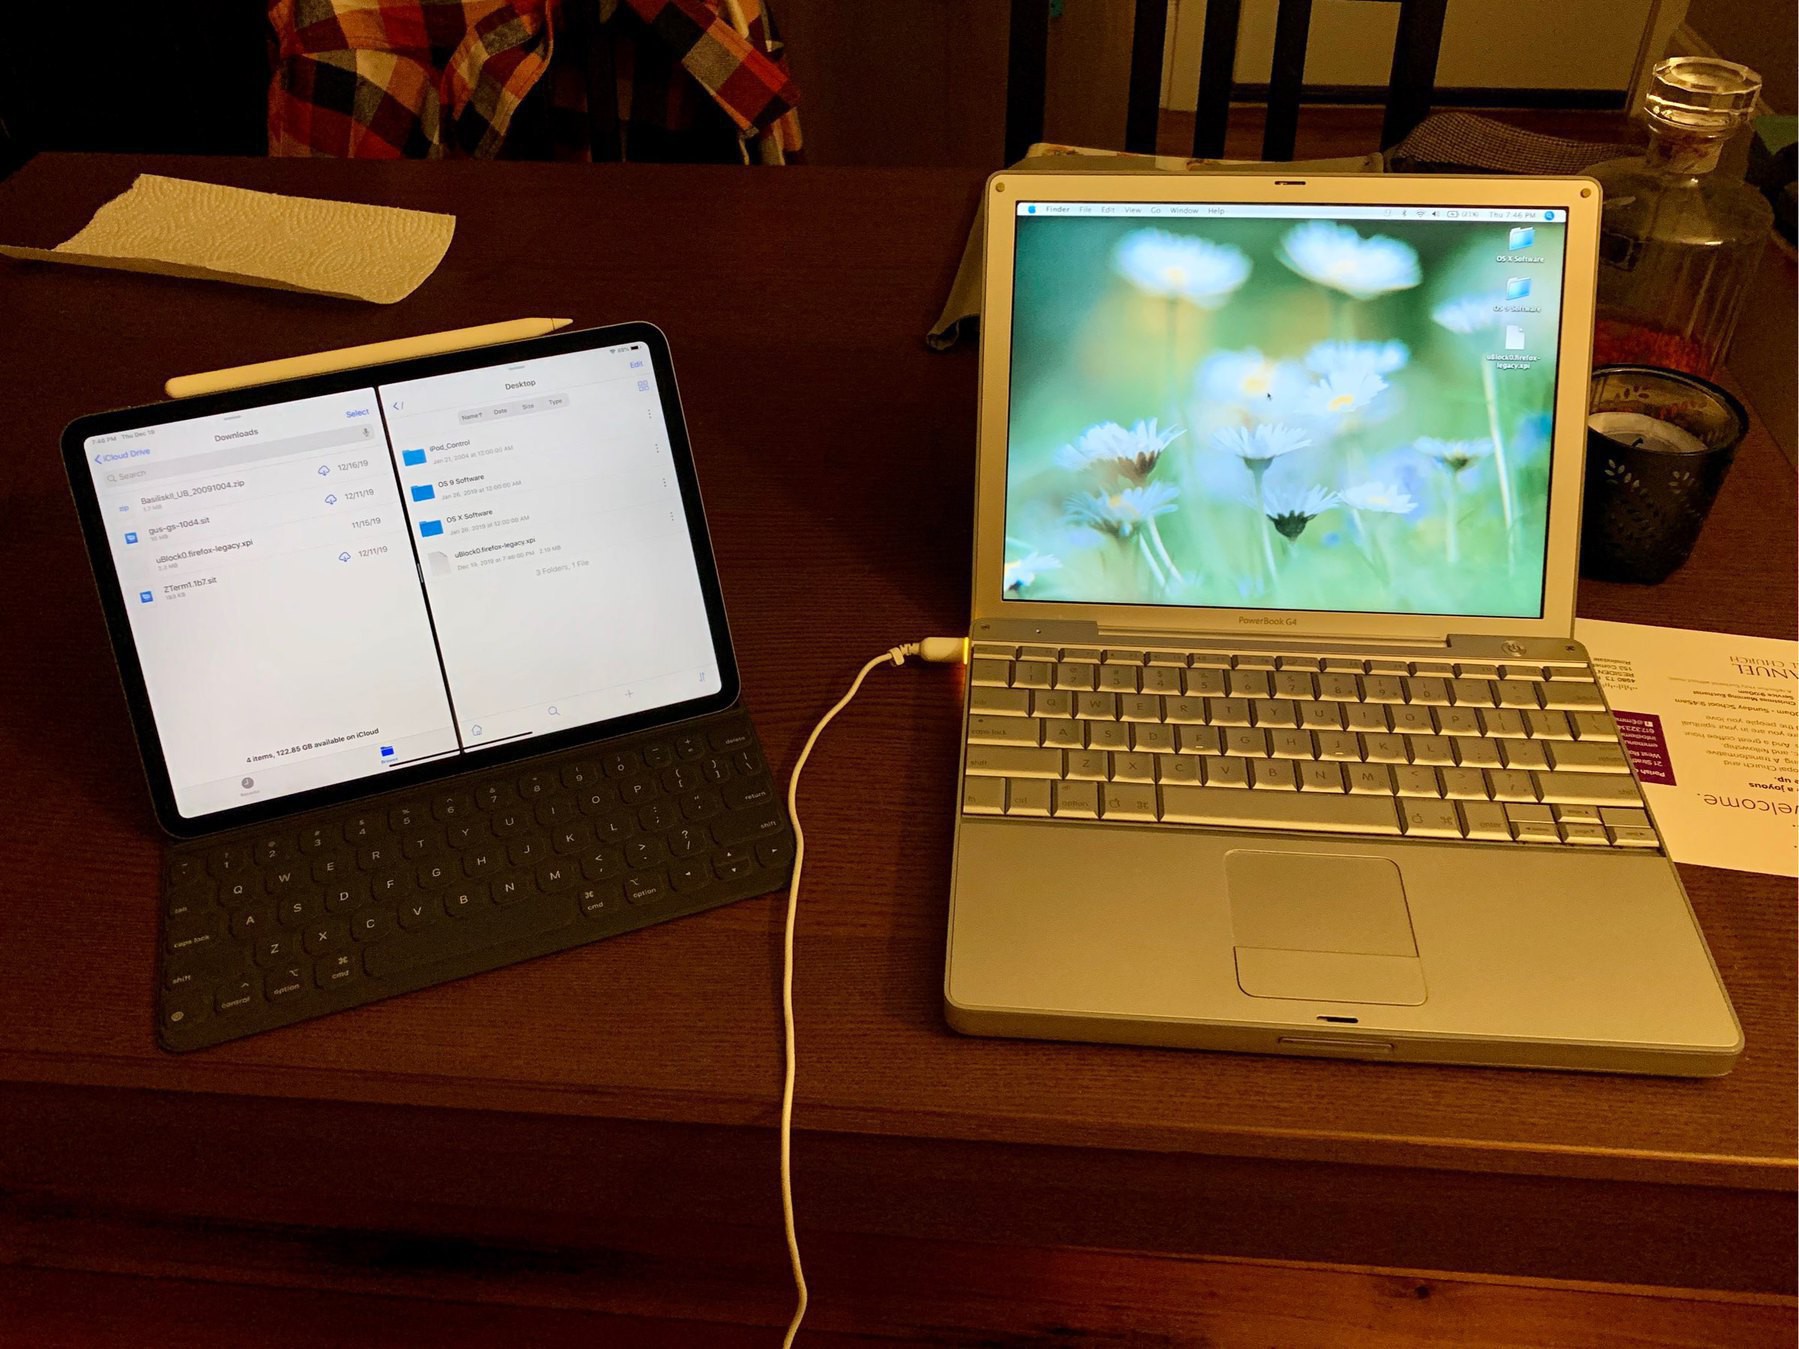 An iPad Pro next to a PowerBook G4 on a table